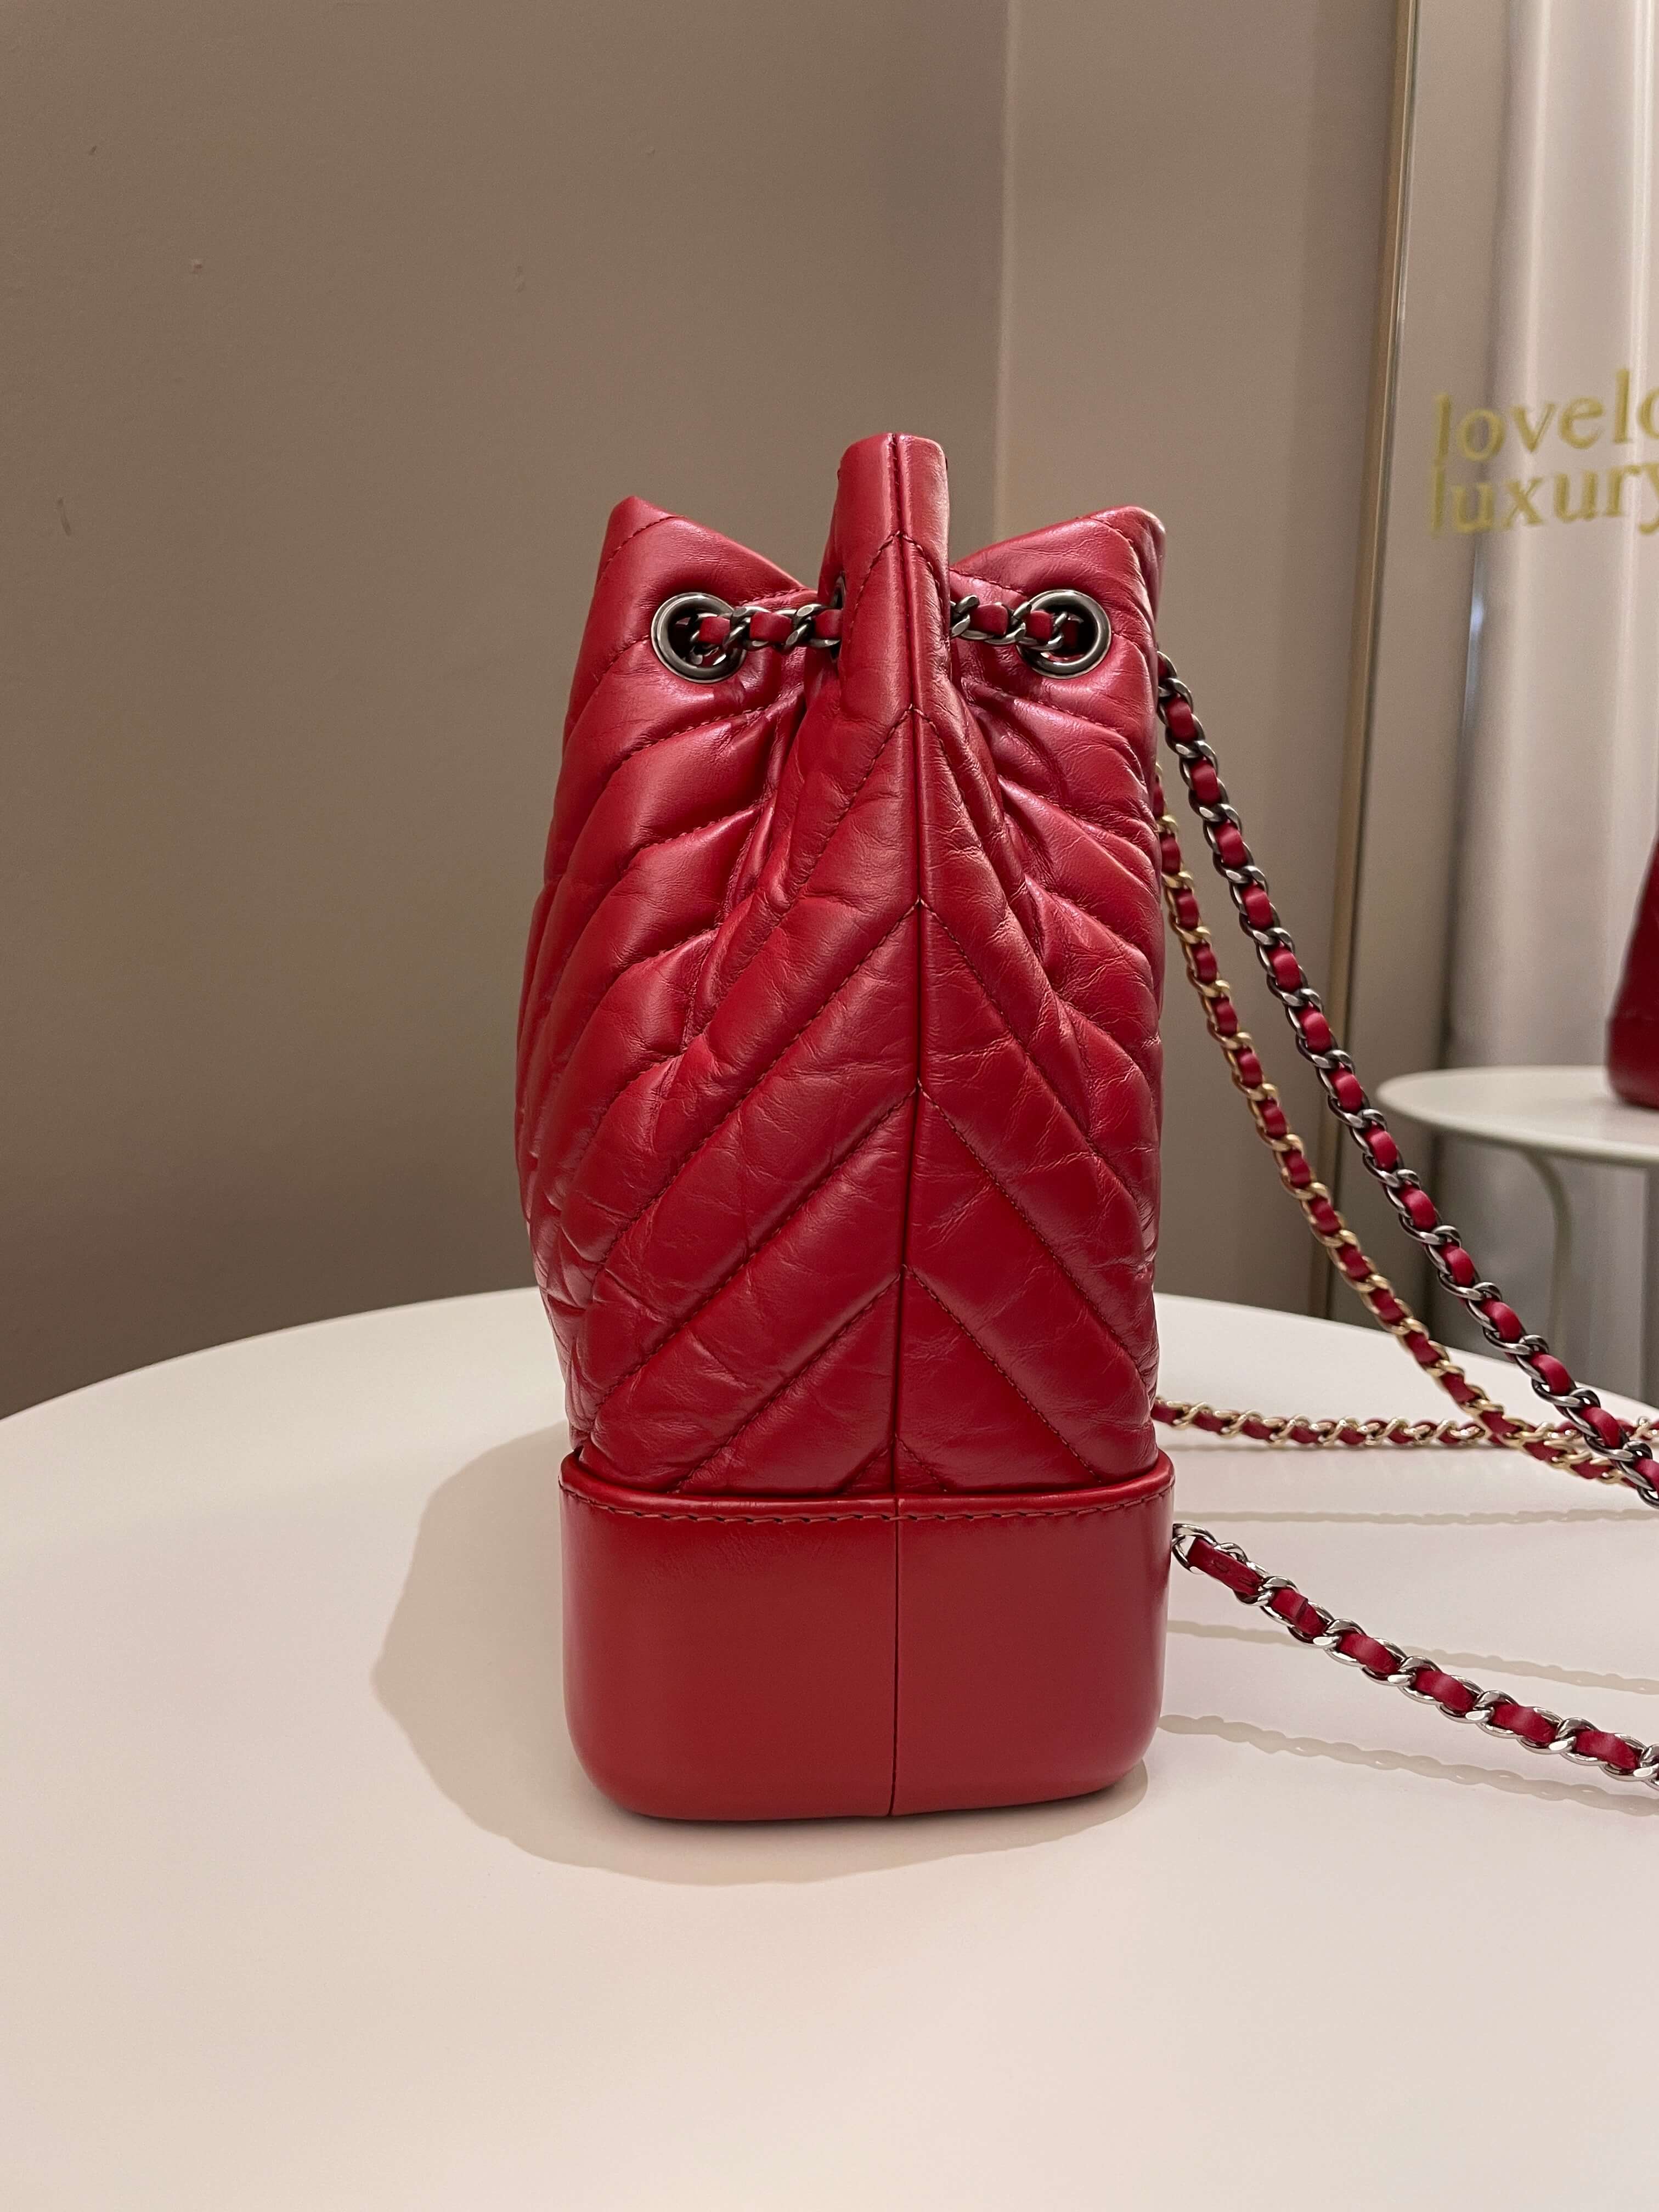 Chanel Red Leather Chevron Gabrielle Backpack Chanel